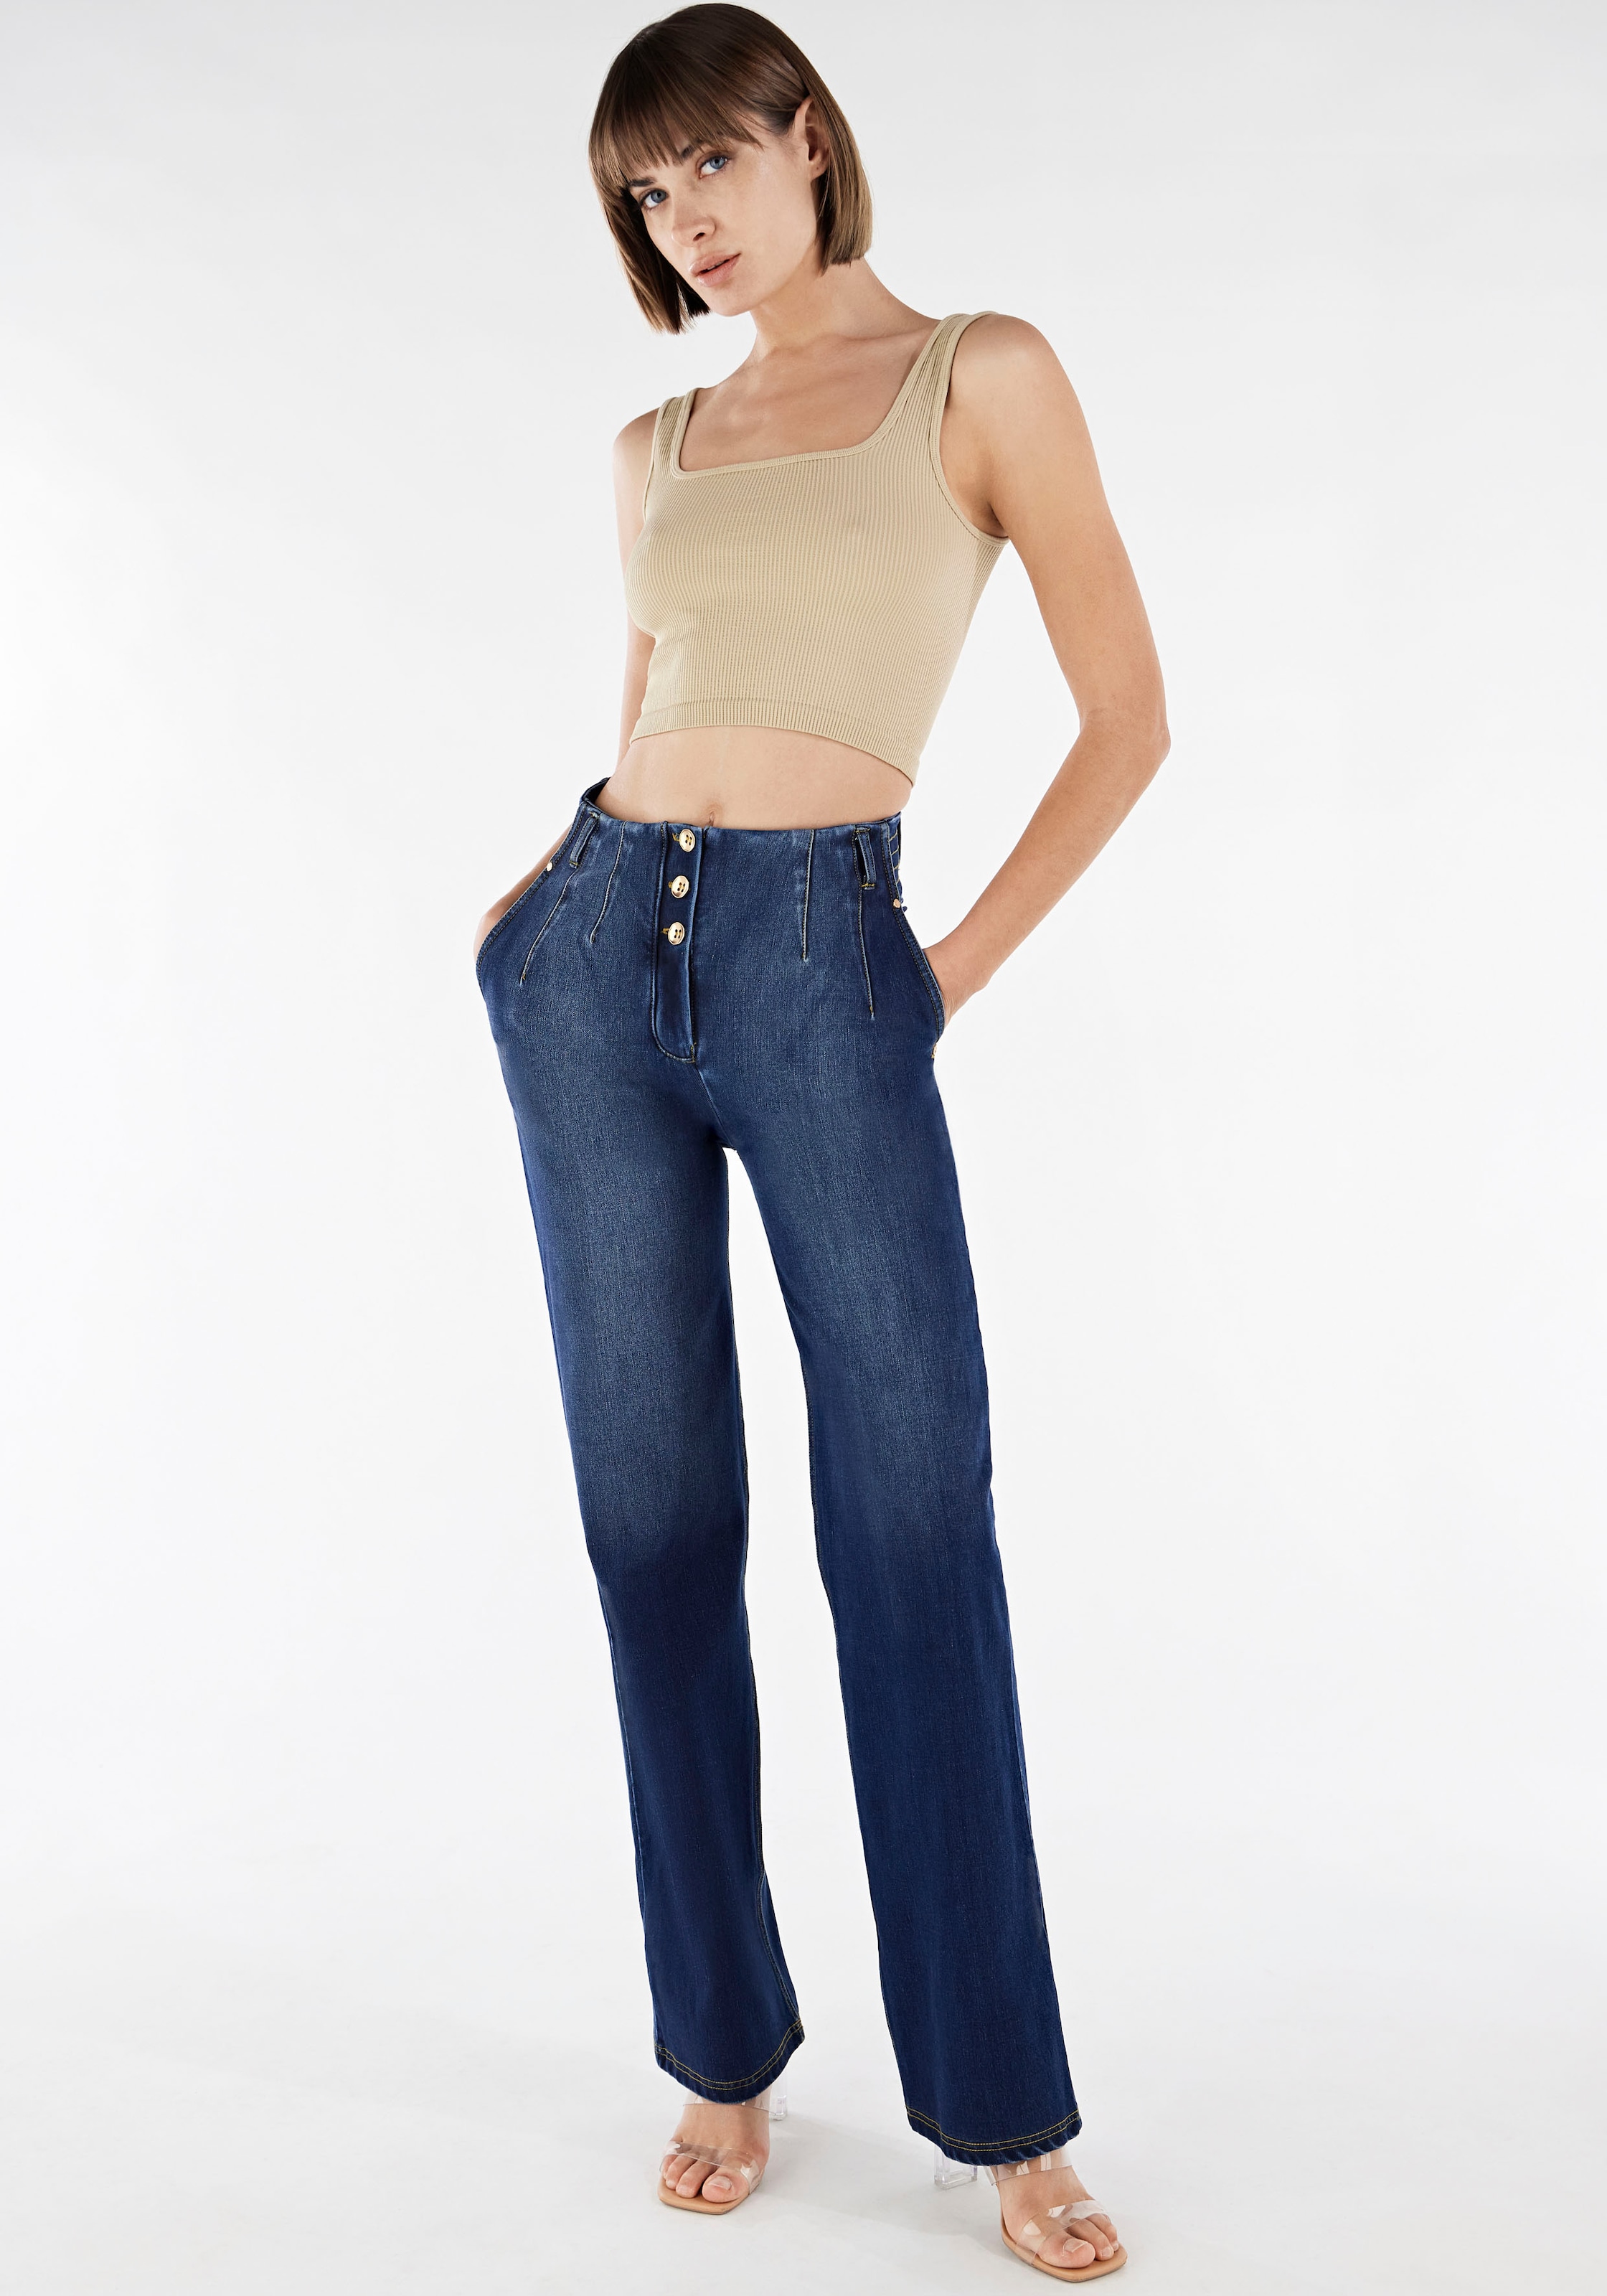 Effekt Skinny-fit-Jeans Shaping bei SUPERSKINNY«, Freddy mit OTTOversand Lifting »WRUP &